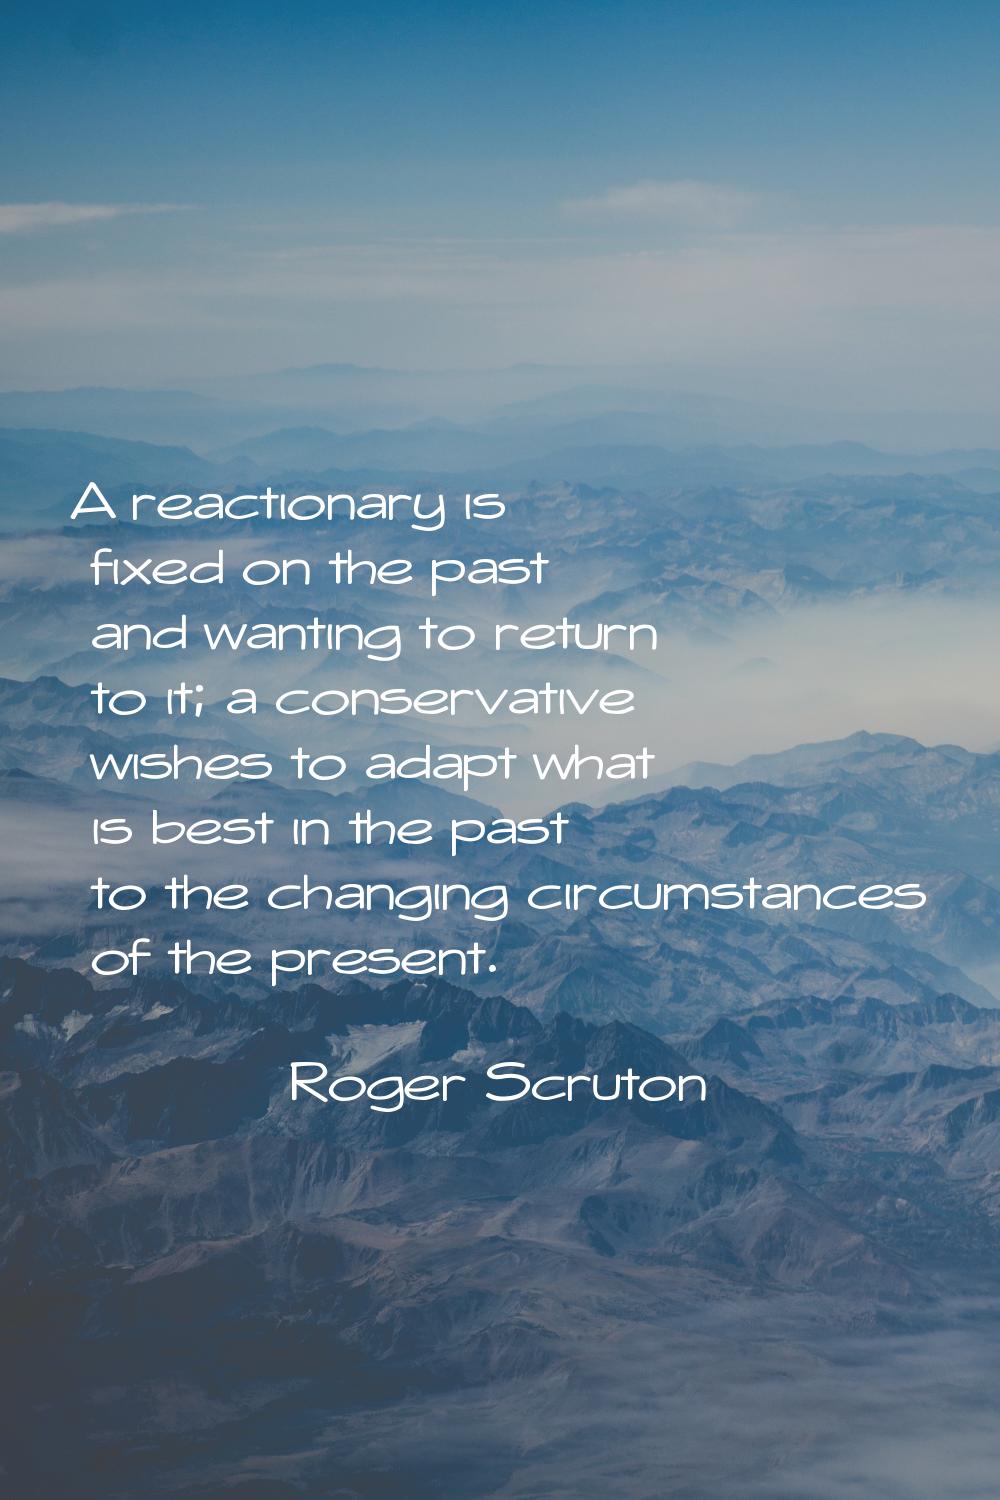 A reactionary is fixed on the past and wanting to return to it; a conservative wishes to adapt what